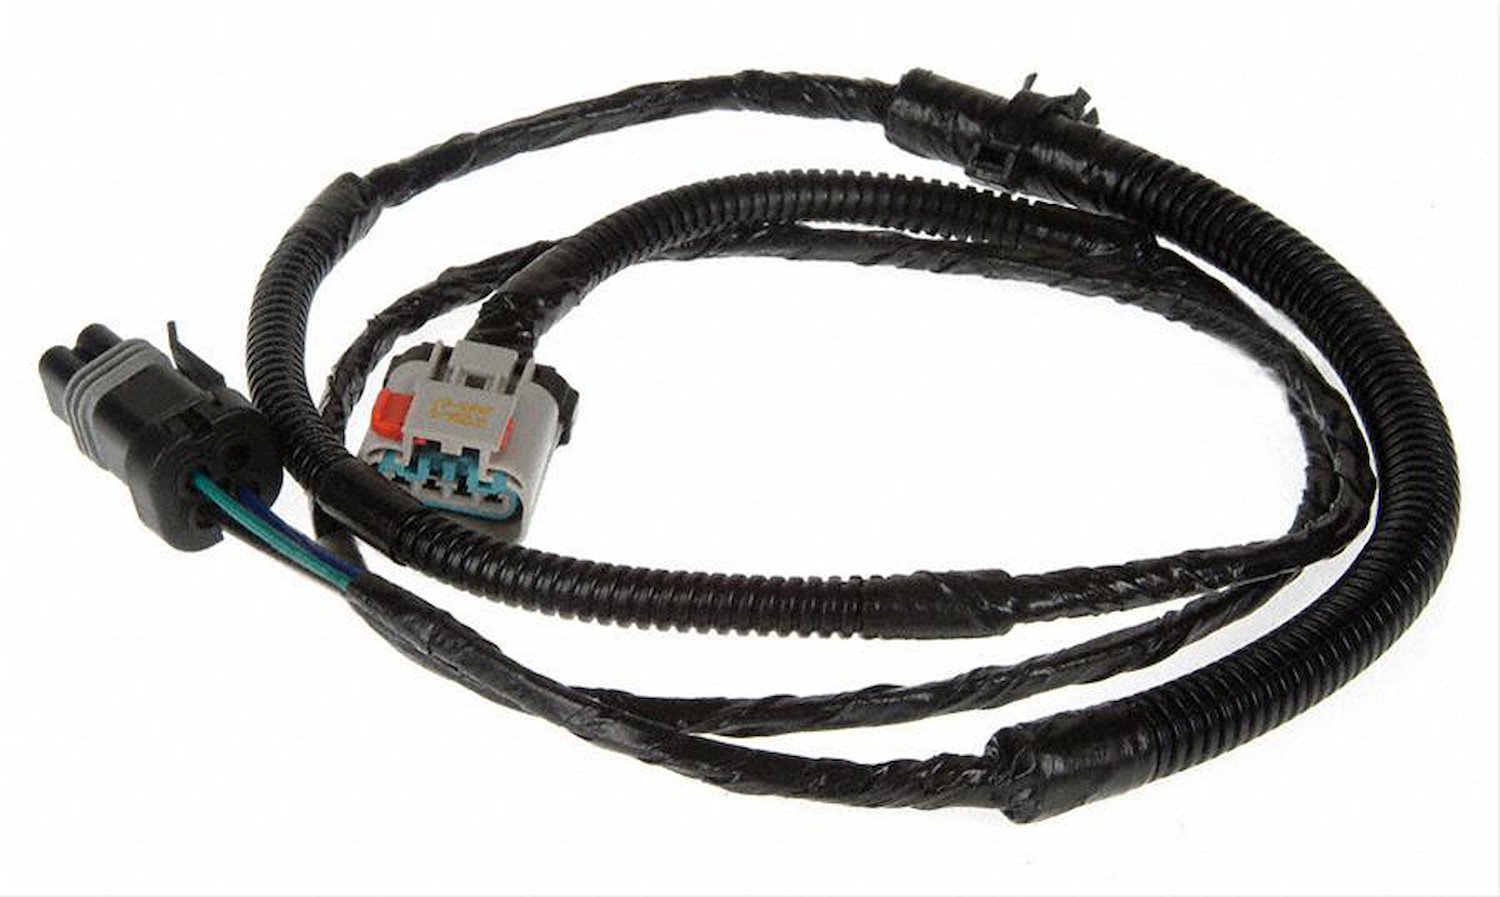 Fuel Pump Wiring Harness for 1991-1995 Chrysler/Dodge/Plymouth Van